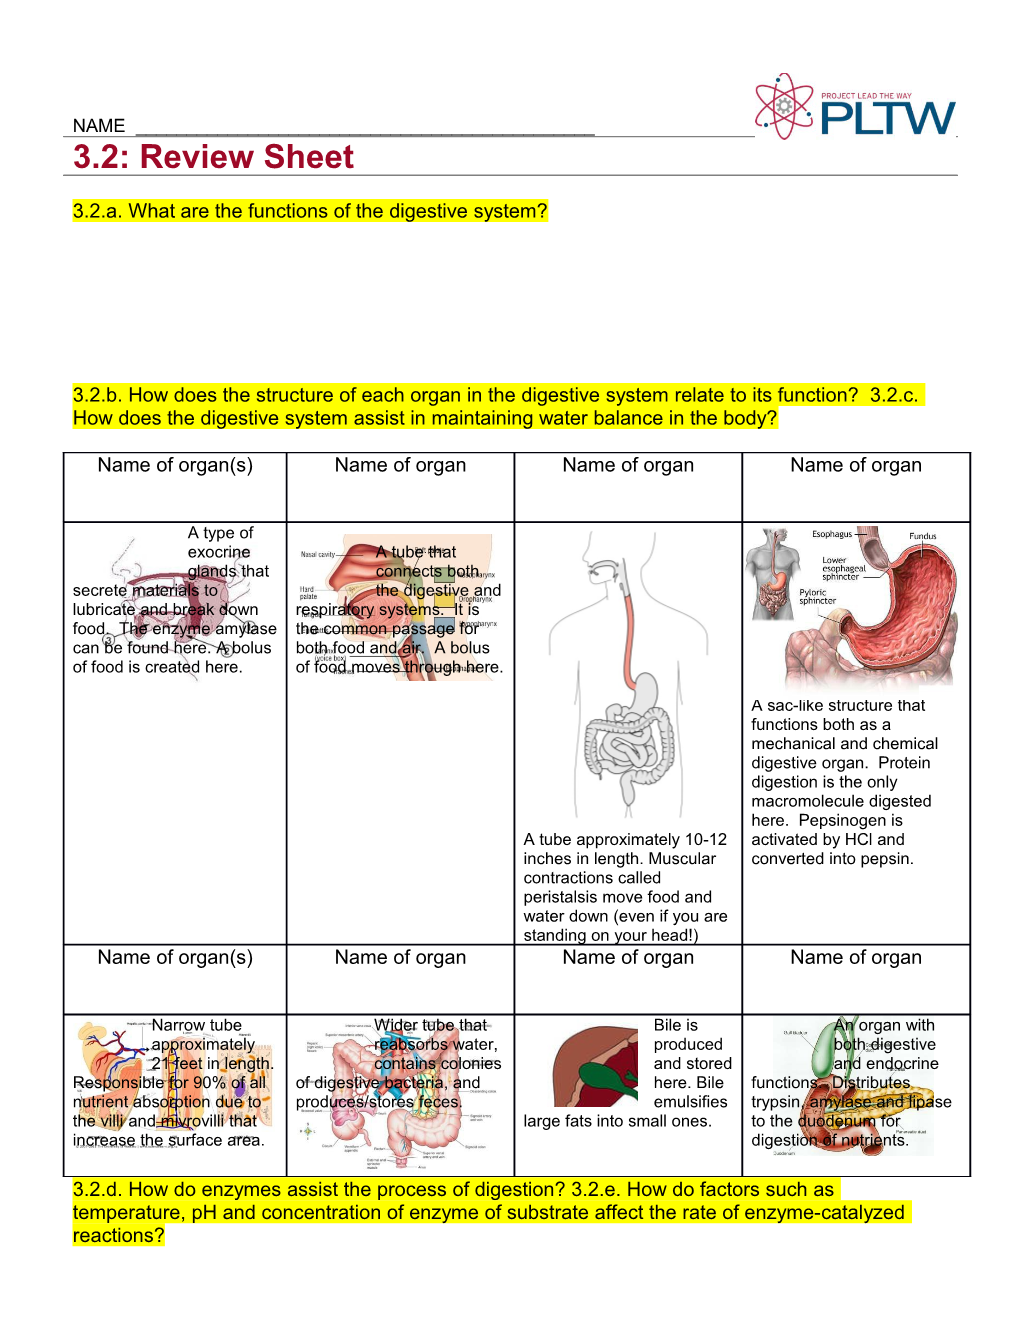 3.2.A. What Are the Functions of the Digestive System?